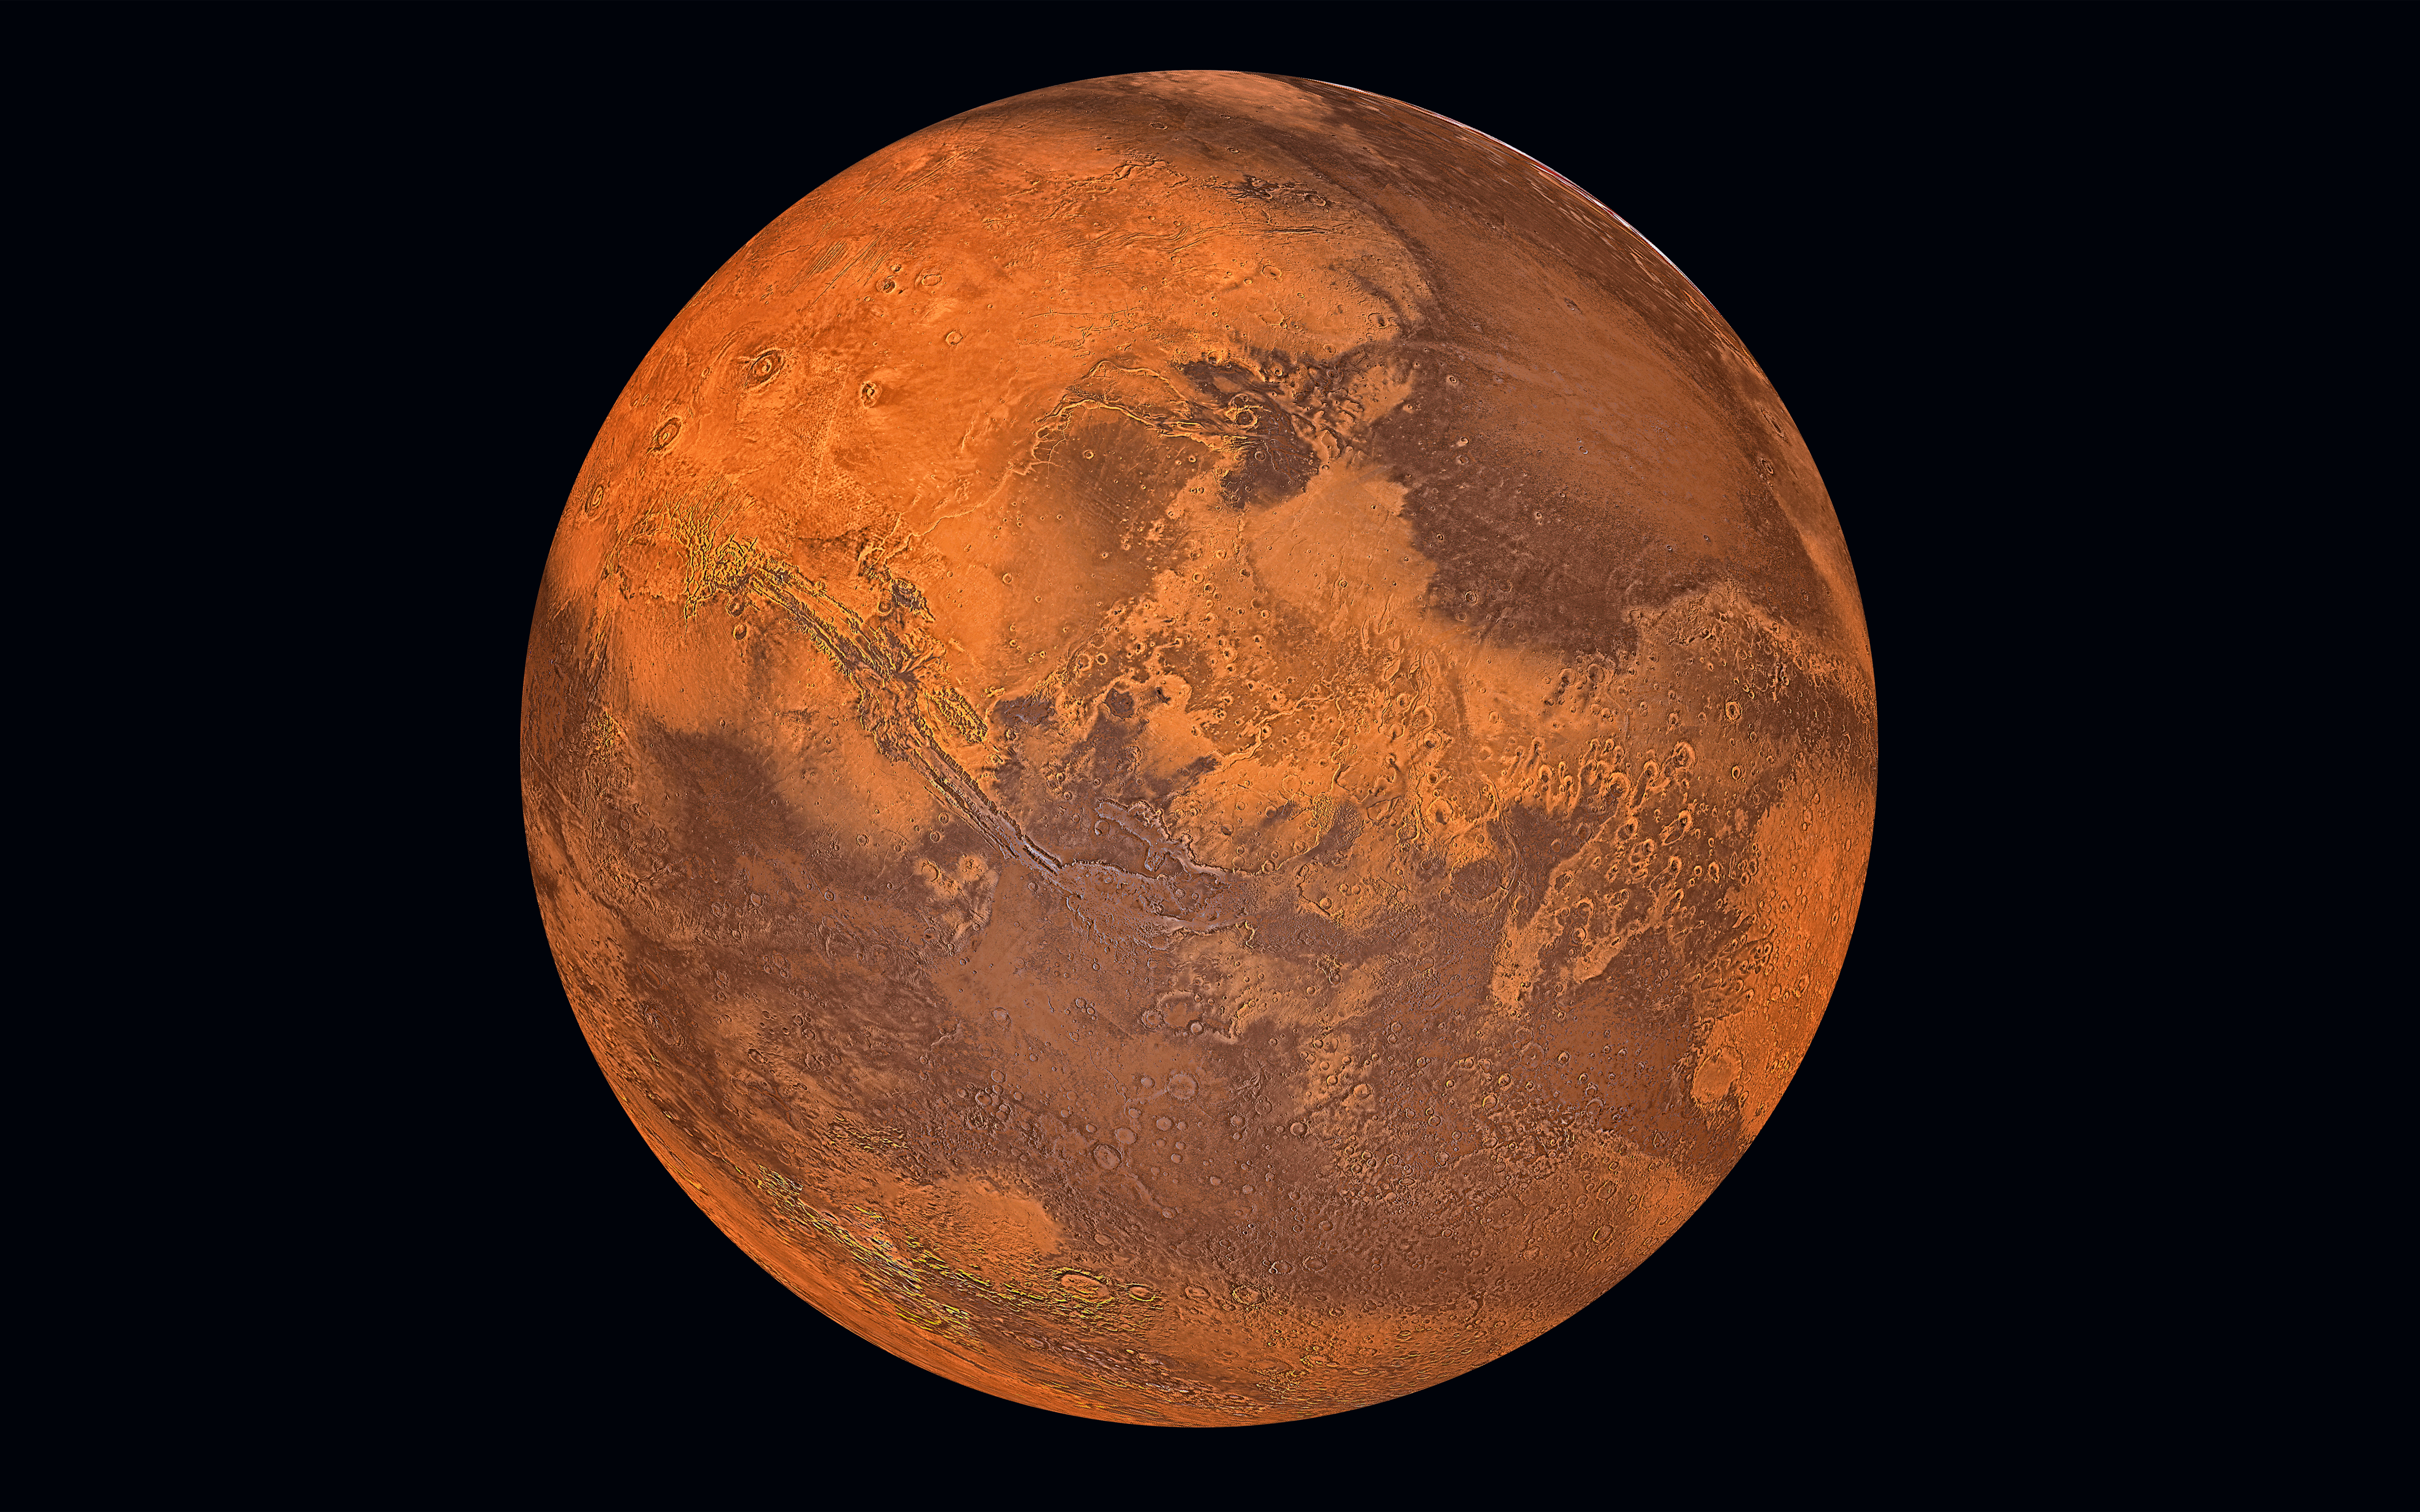 We now know Mars as a dry, dry planet